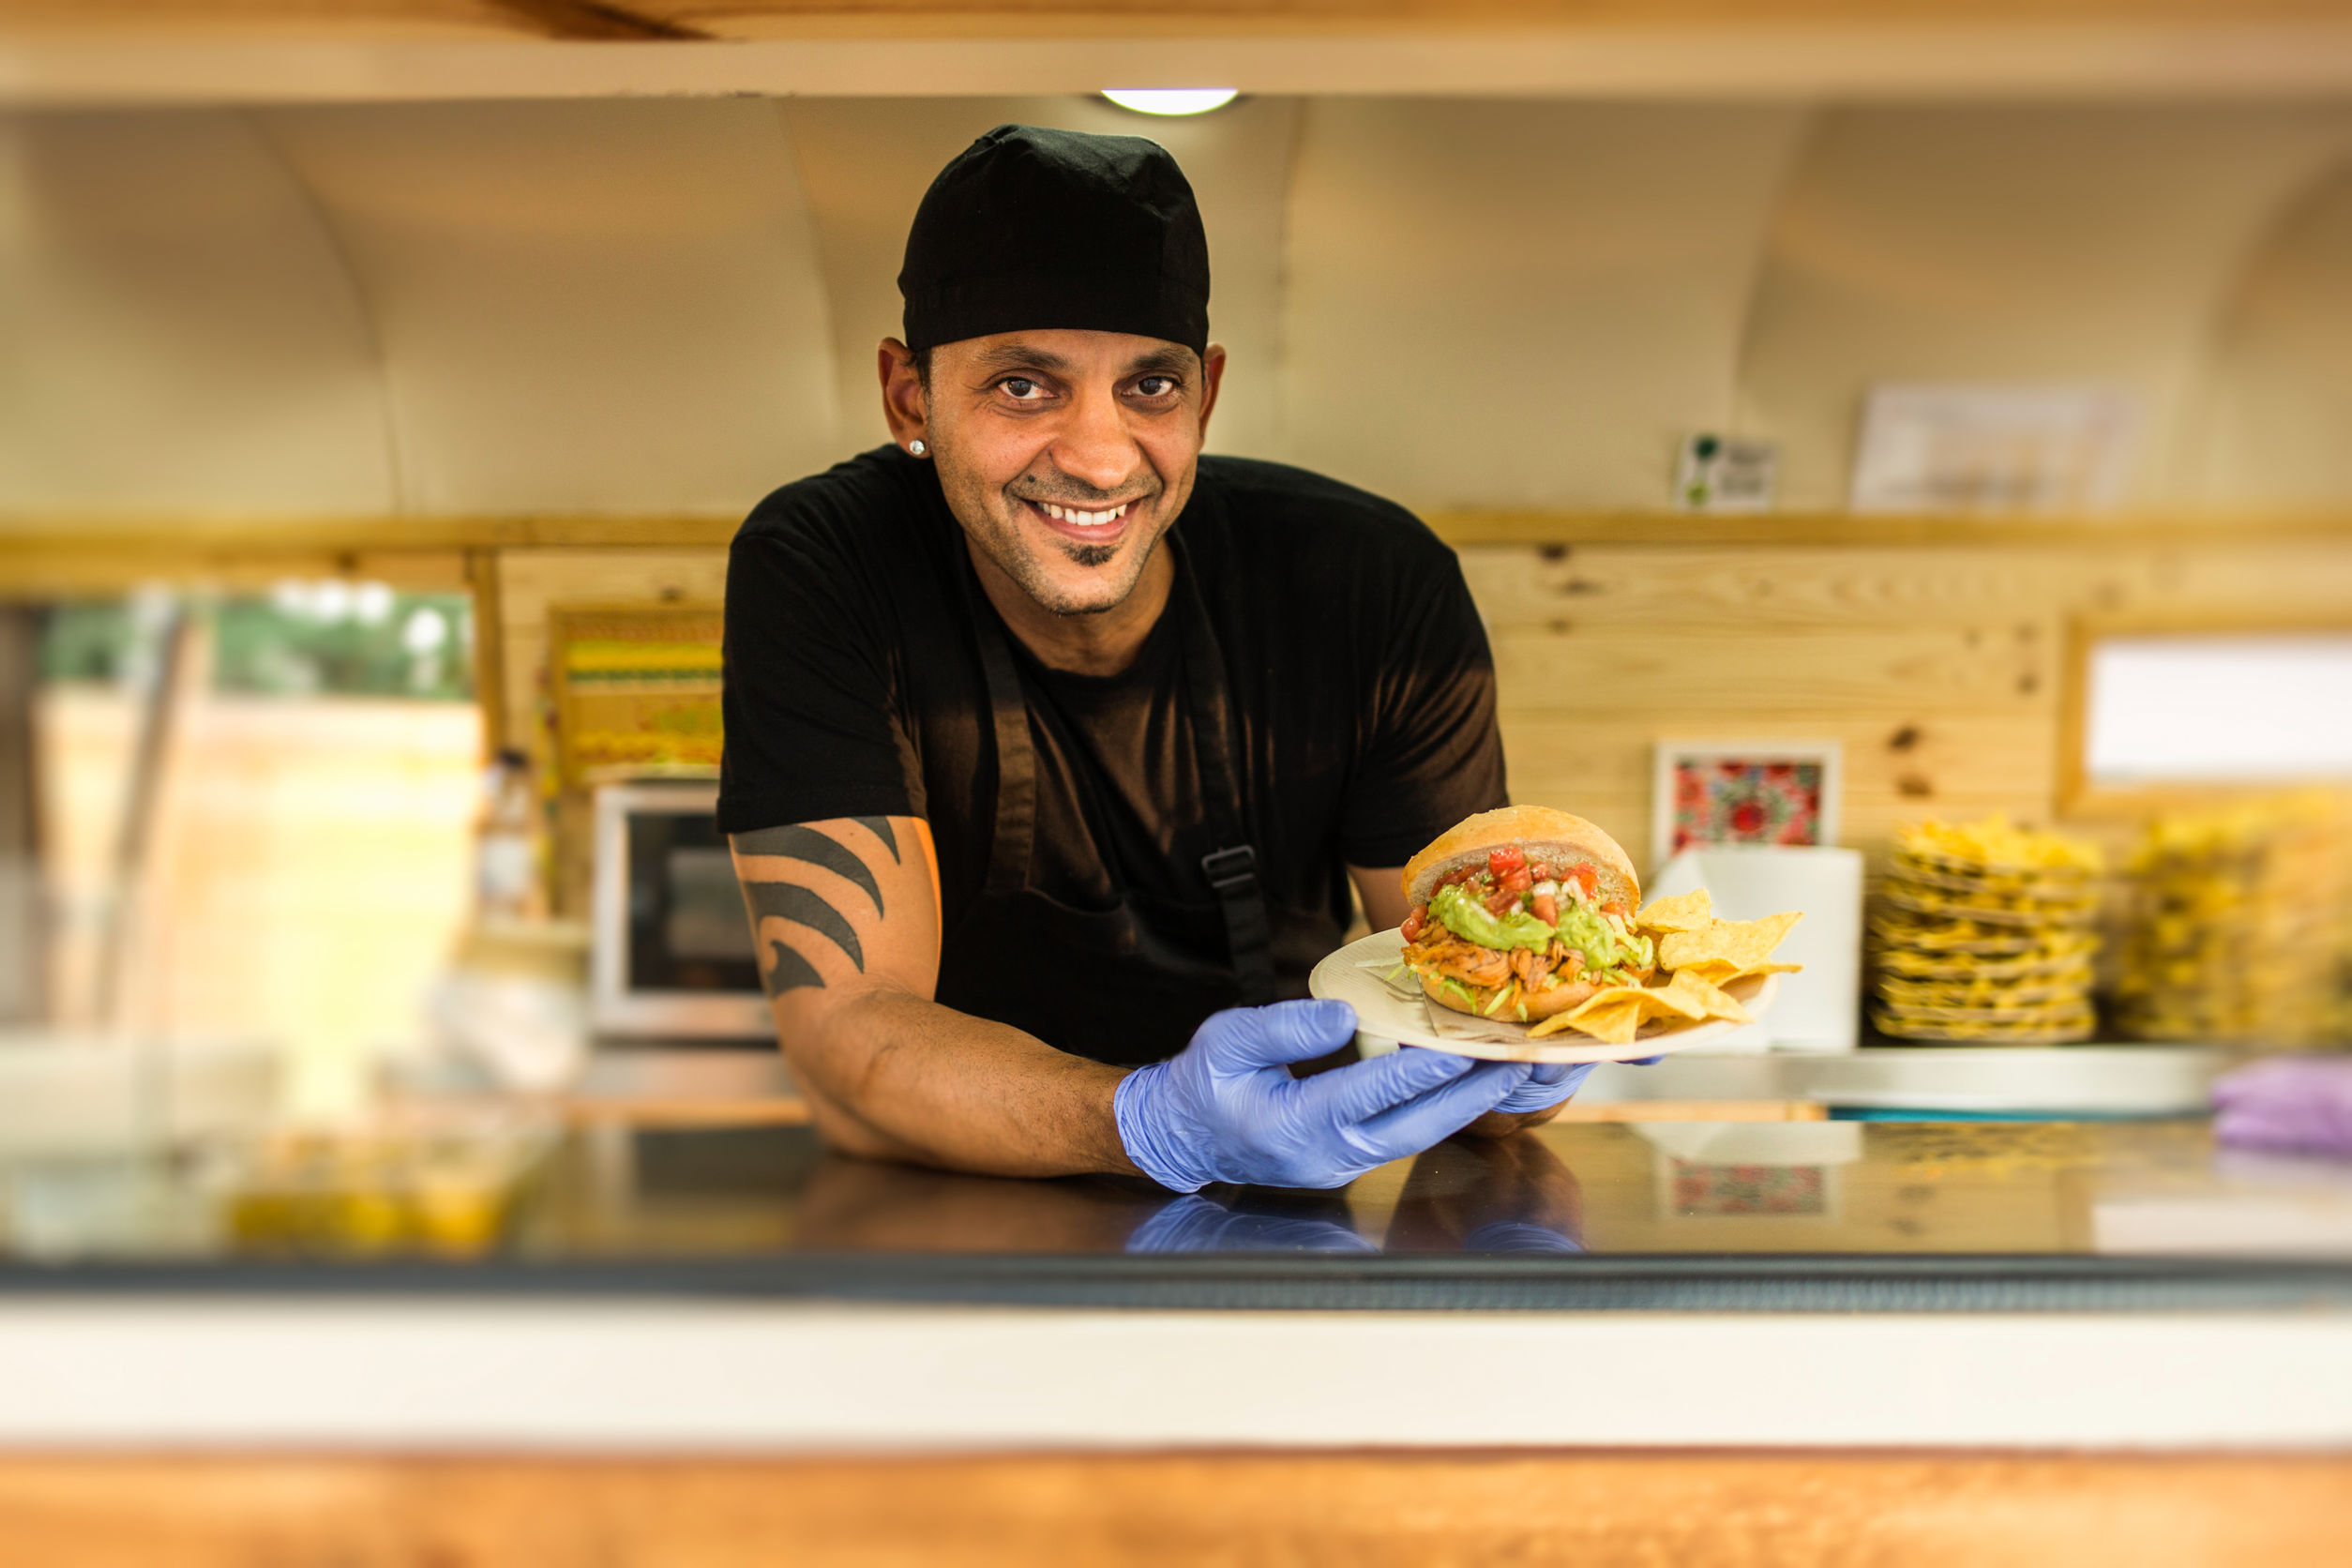 Ready to Buy a Food Truck for Your Family Business? These Tips Will Help